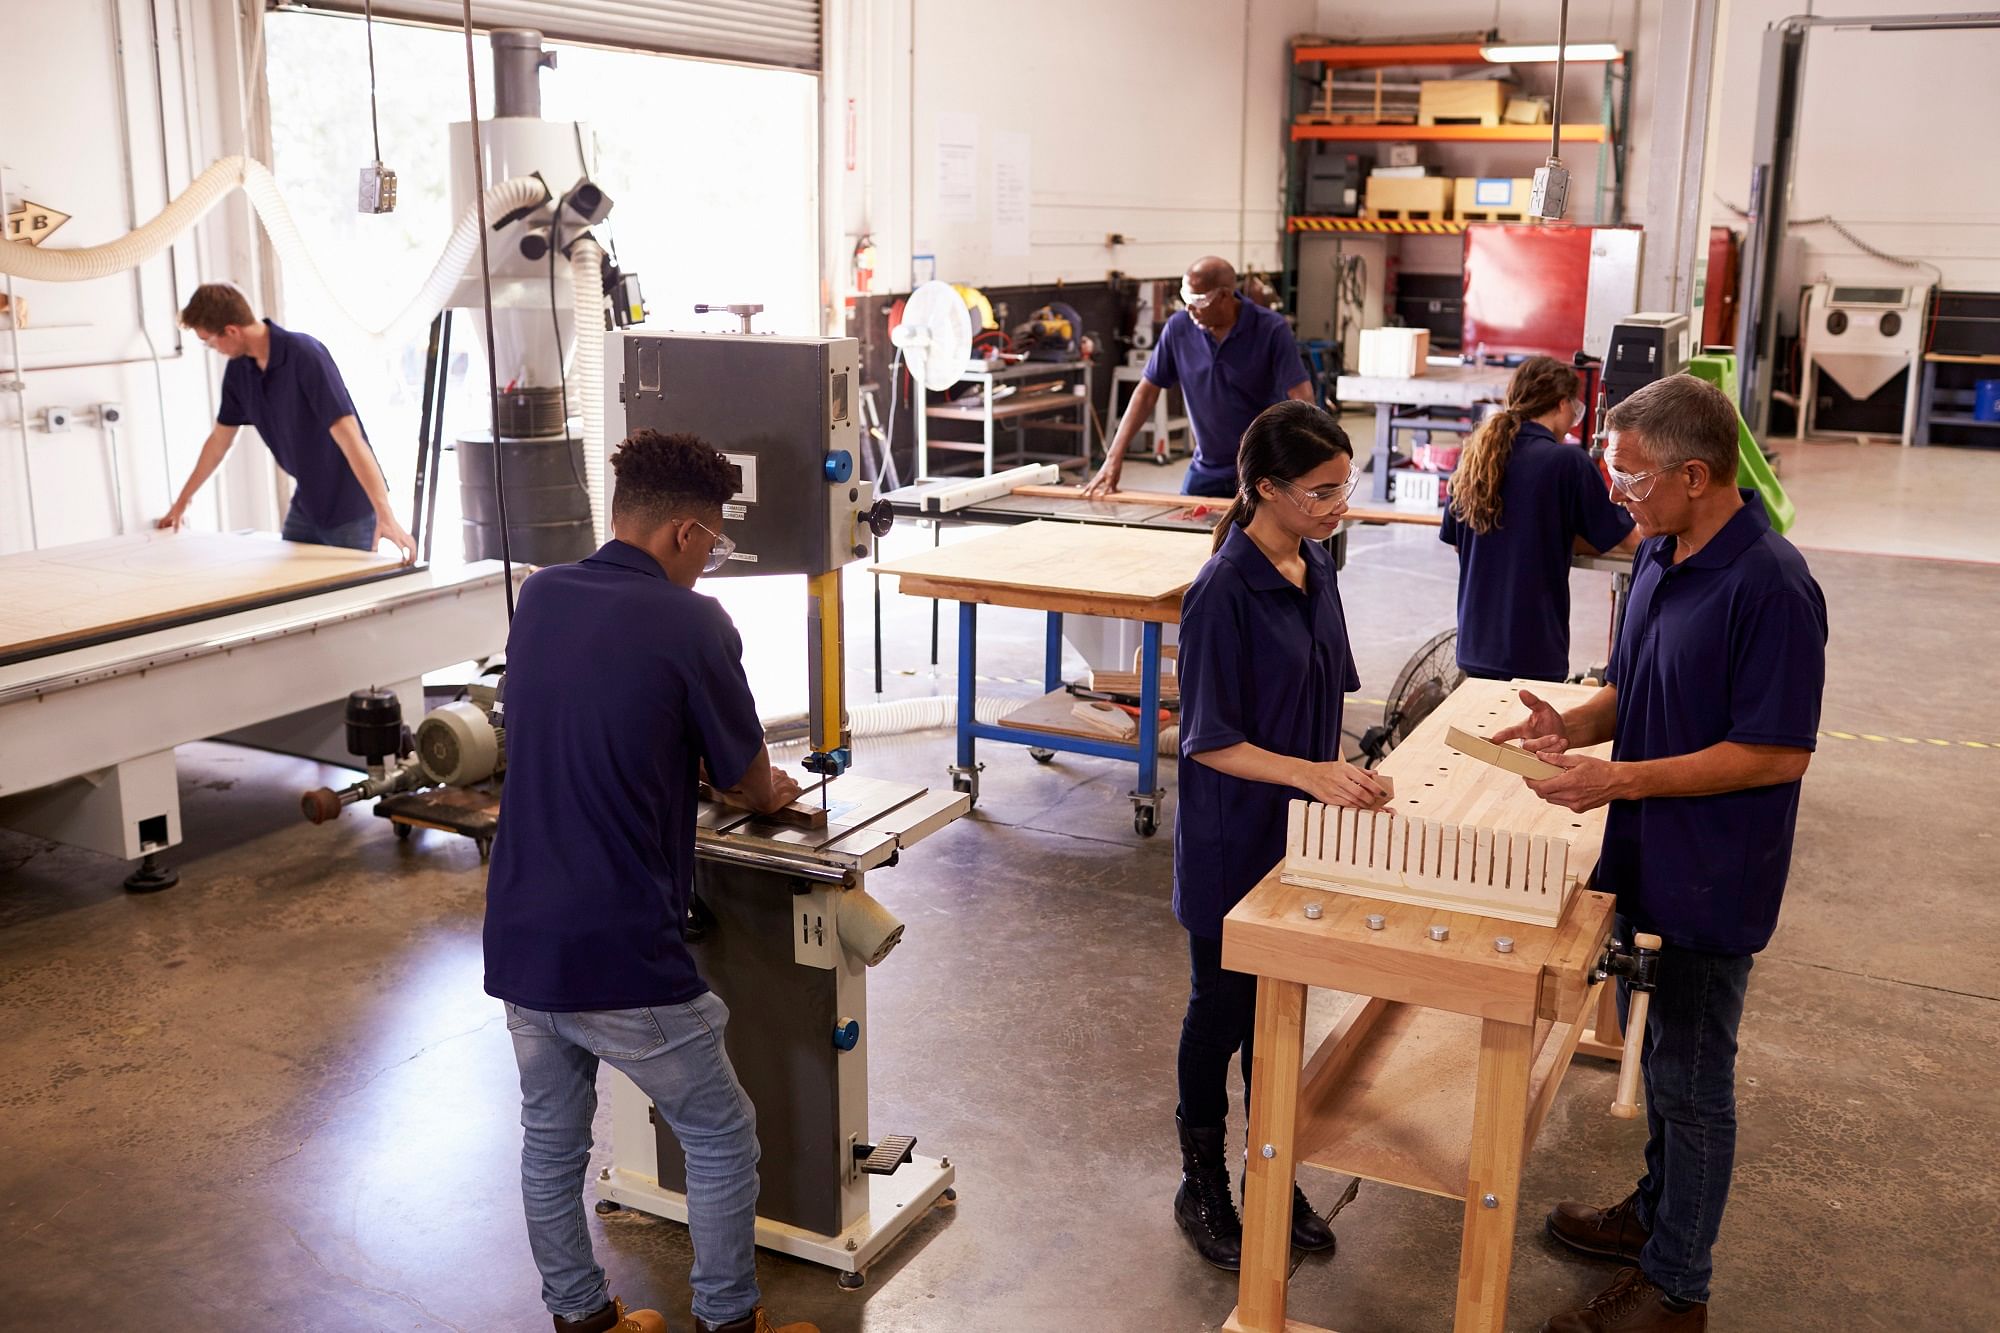  A structured apprenticeship programme can help learners develop skills in line with the demands of the workplace.